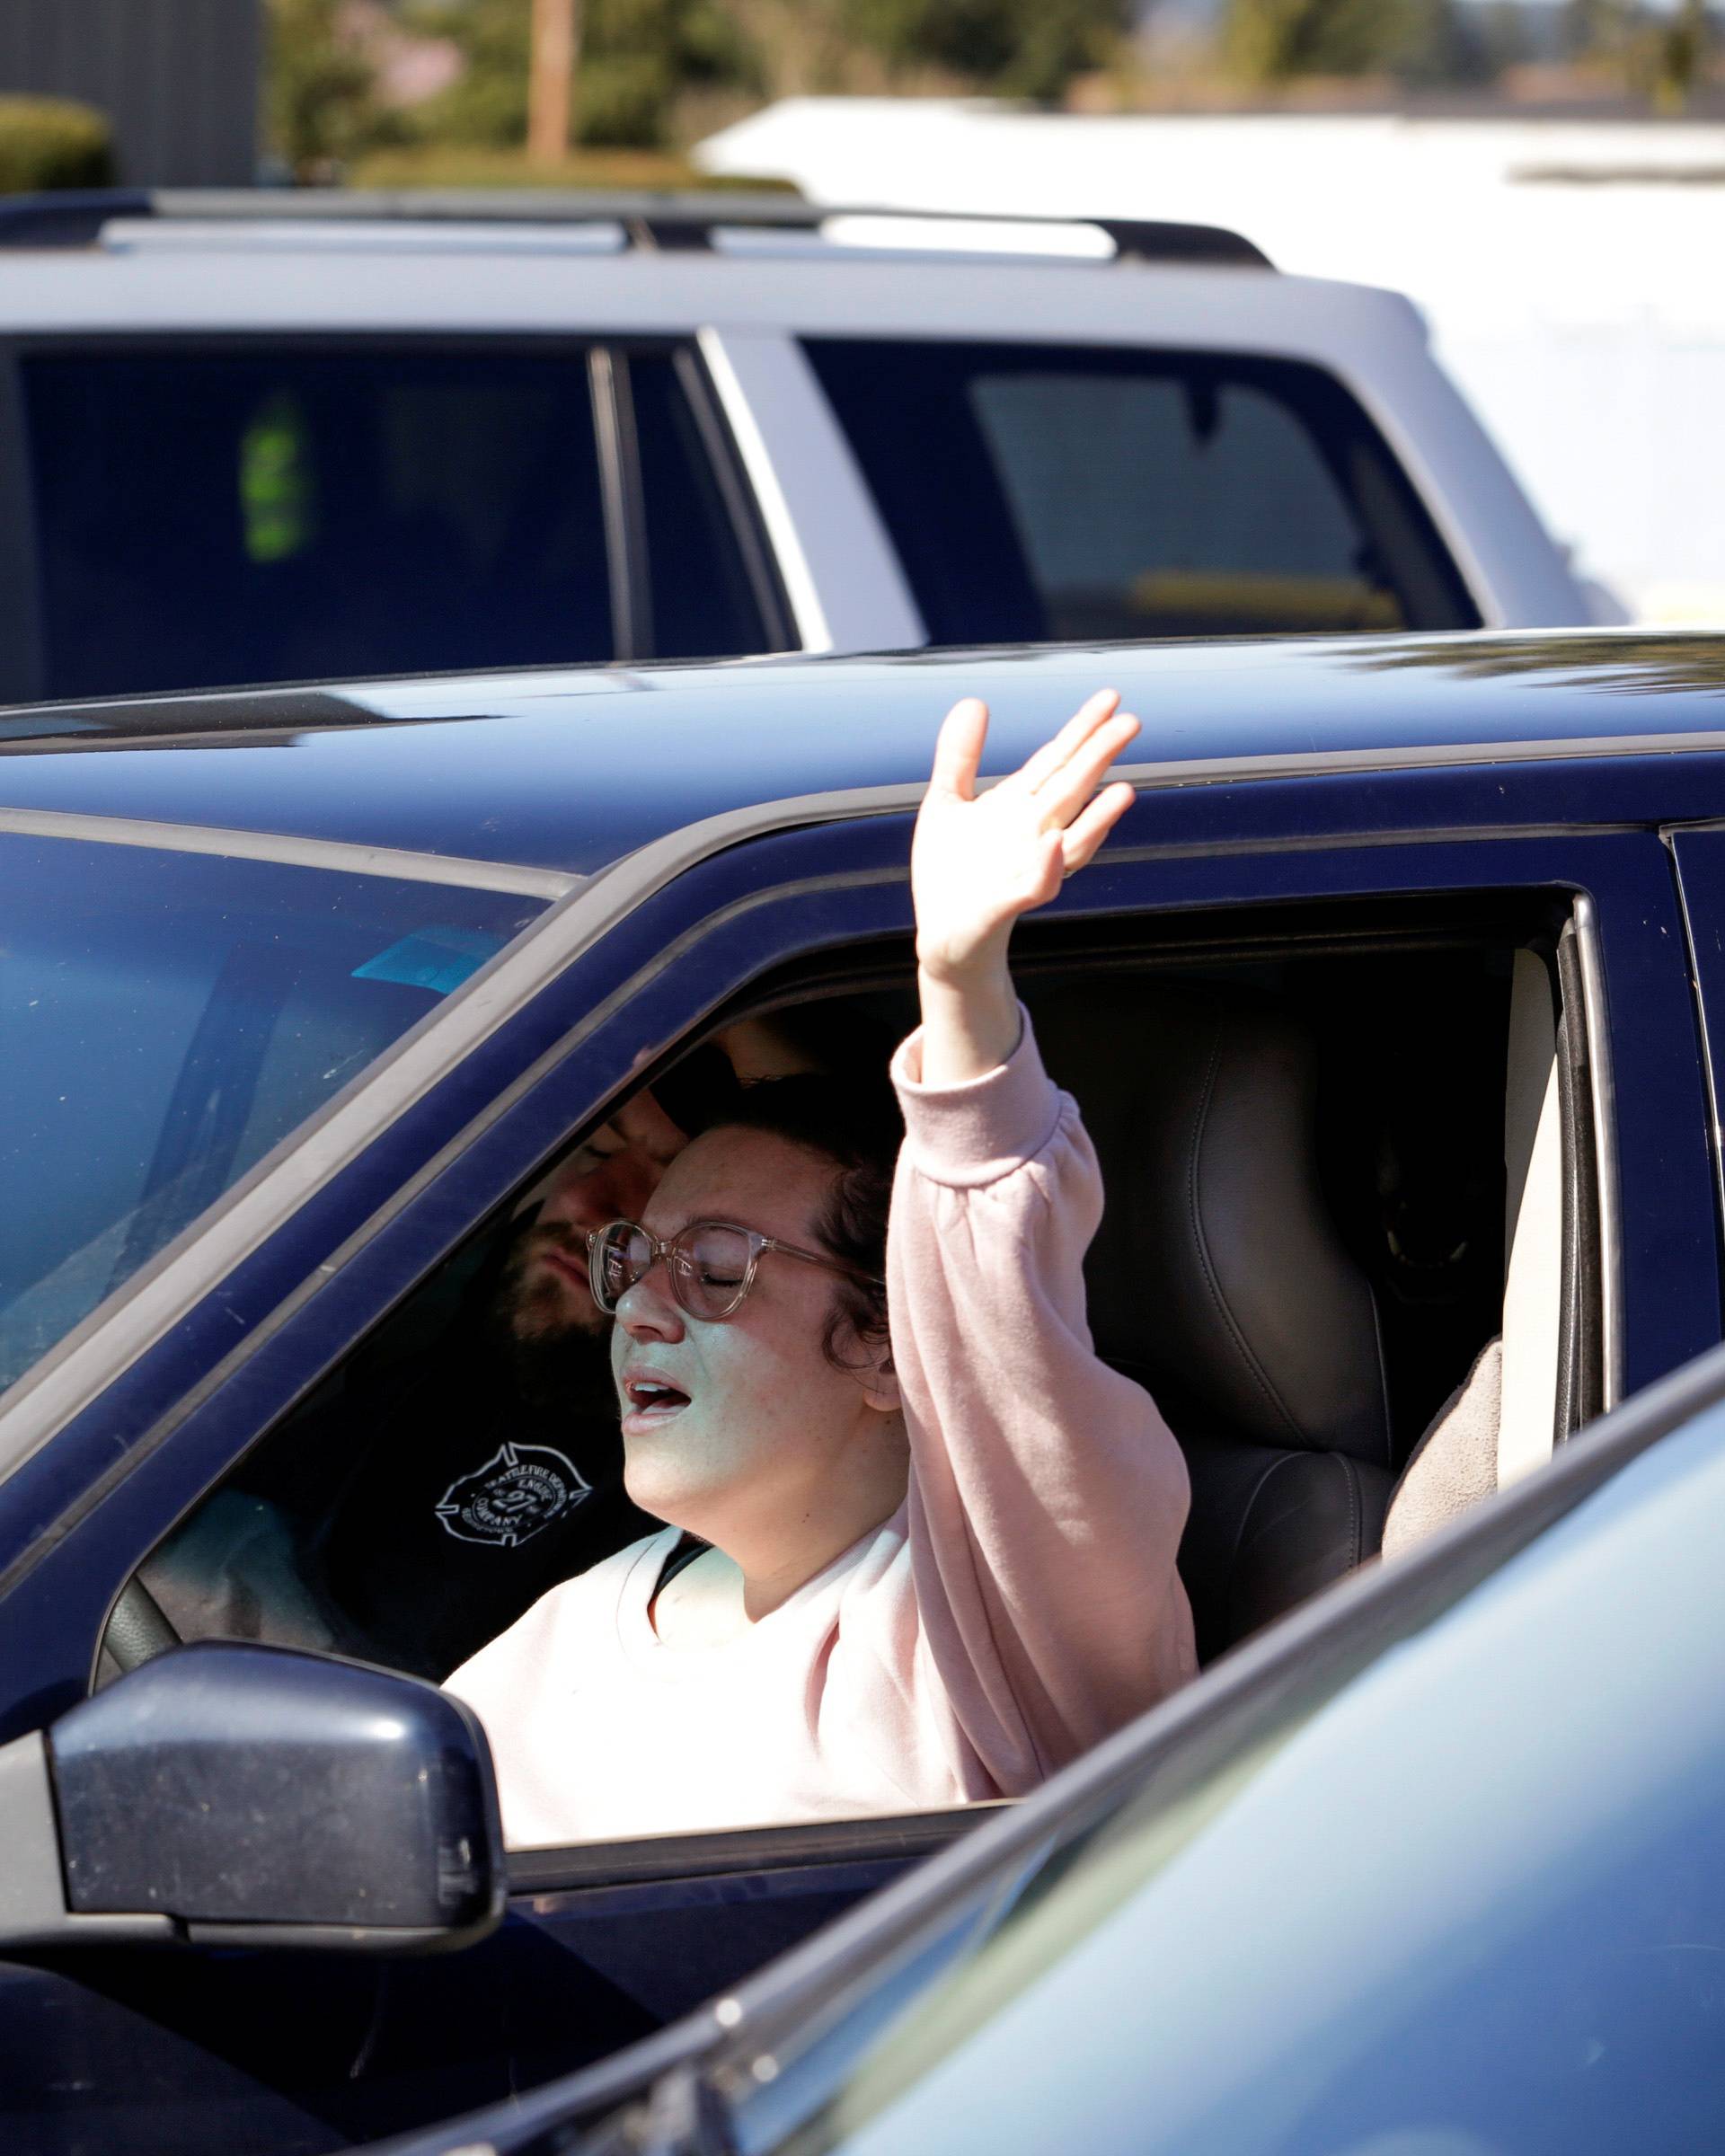 Hopkins worships during a "drive-in" church service at The Grove Church after large gatherings were banned due to the coronavirus outbreak in Marysville